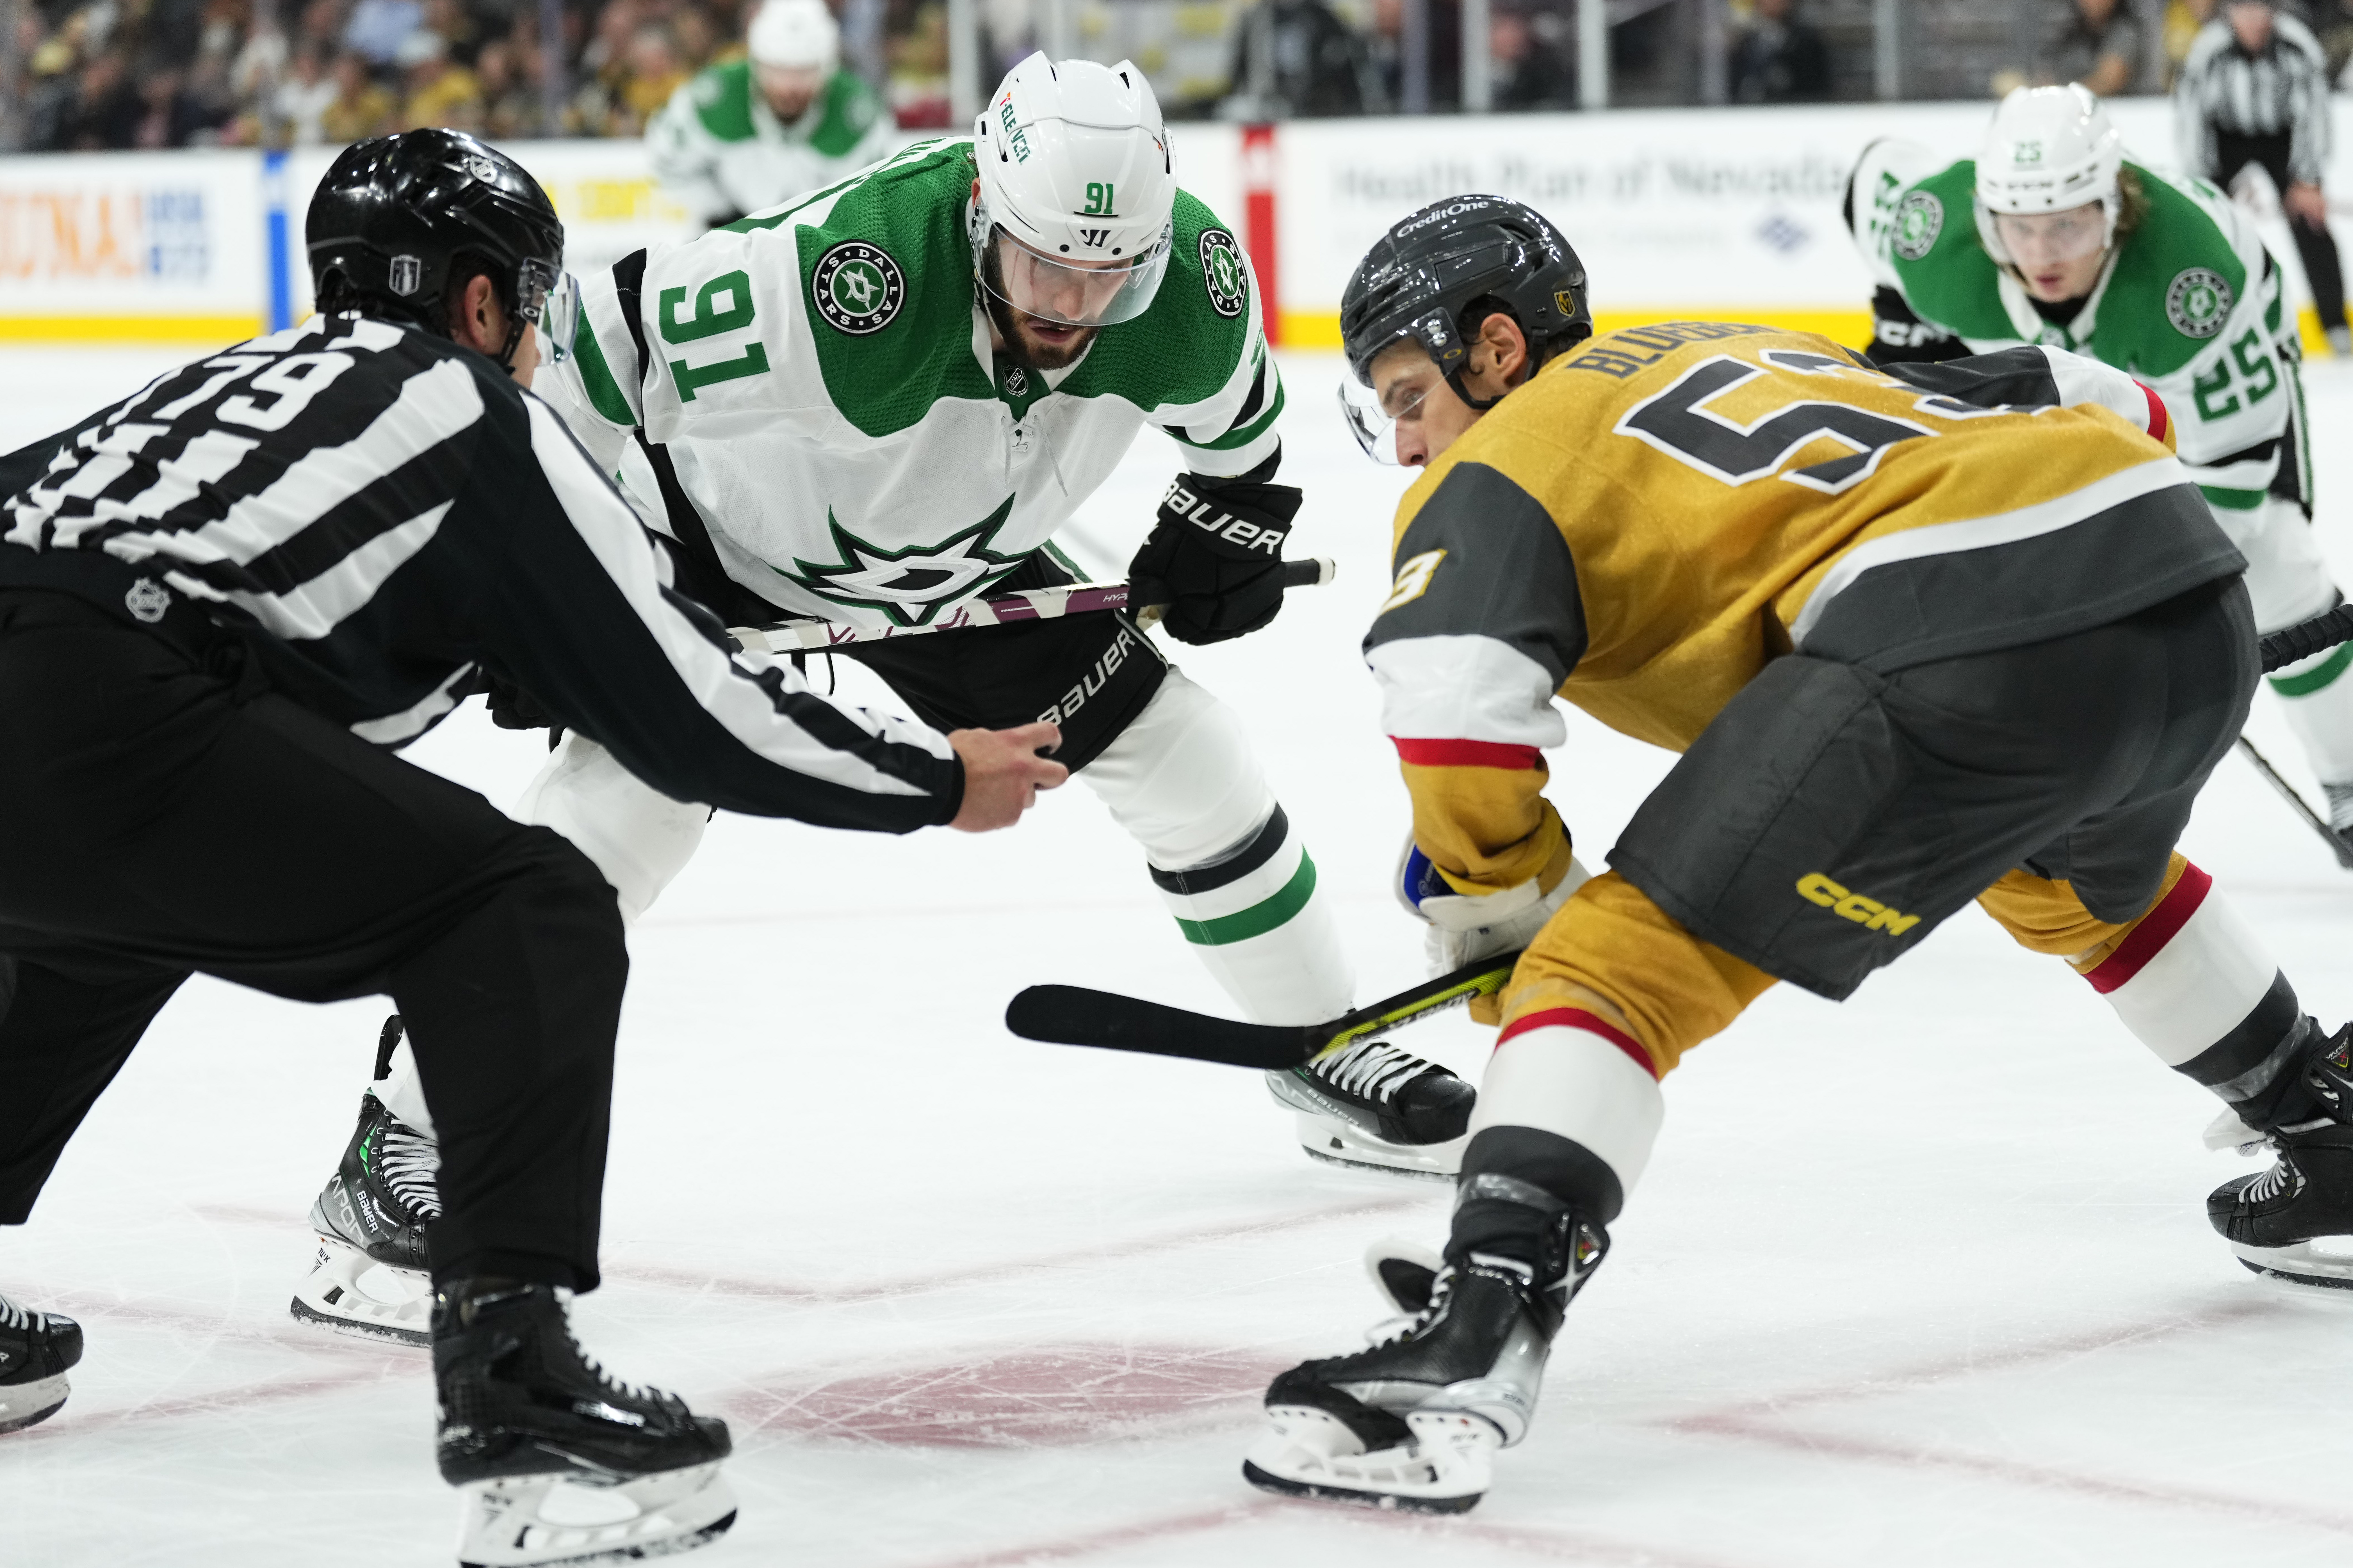 Teddy Blueger #53 of the Vegas Golden Knights prepares to face off against Tyler Seguin #91 of the Dallas Stars during the third period in Game One of the Western Conference Final of the 2023 Stanley Cup Playoffs at T-Mobile Arena on May 19, 2023 in Las Vegas, Nevada.